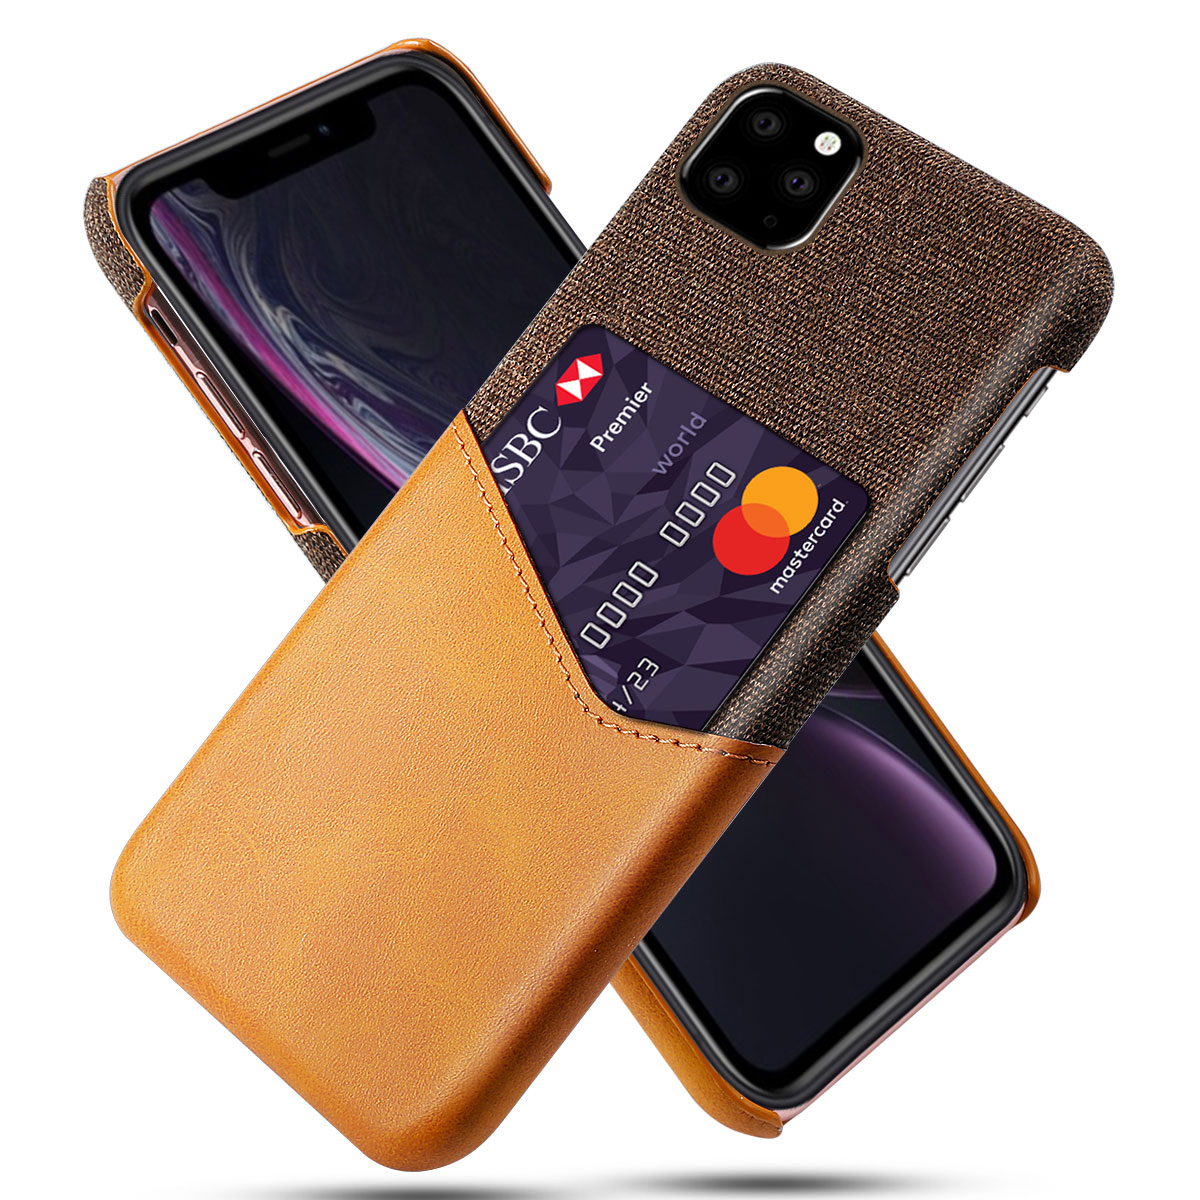 Bakeey-Luxury-PU-Leather-Cloth-with-Card-Slot-Shockproof-Anti-scratch-Protective-Case-for-iPhone-11--1610634-5